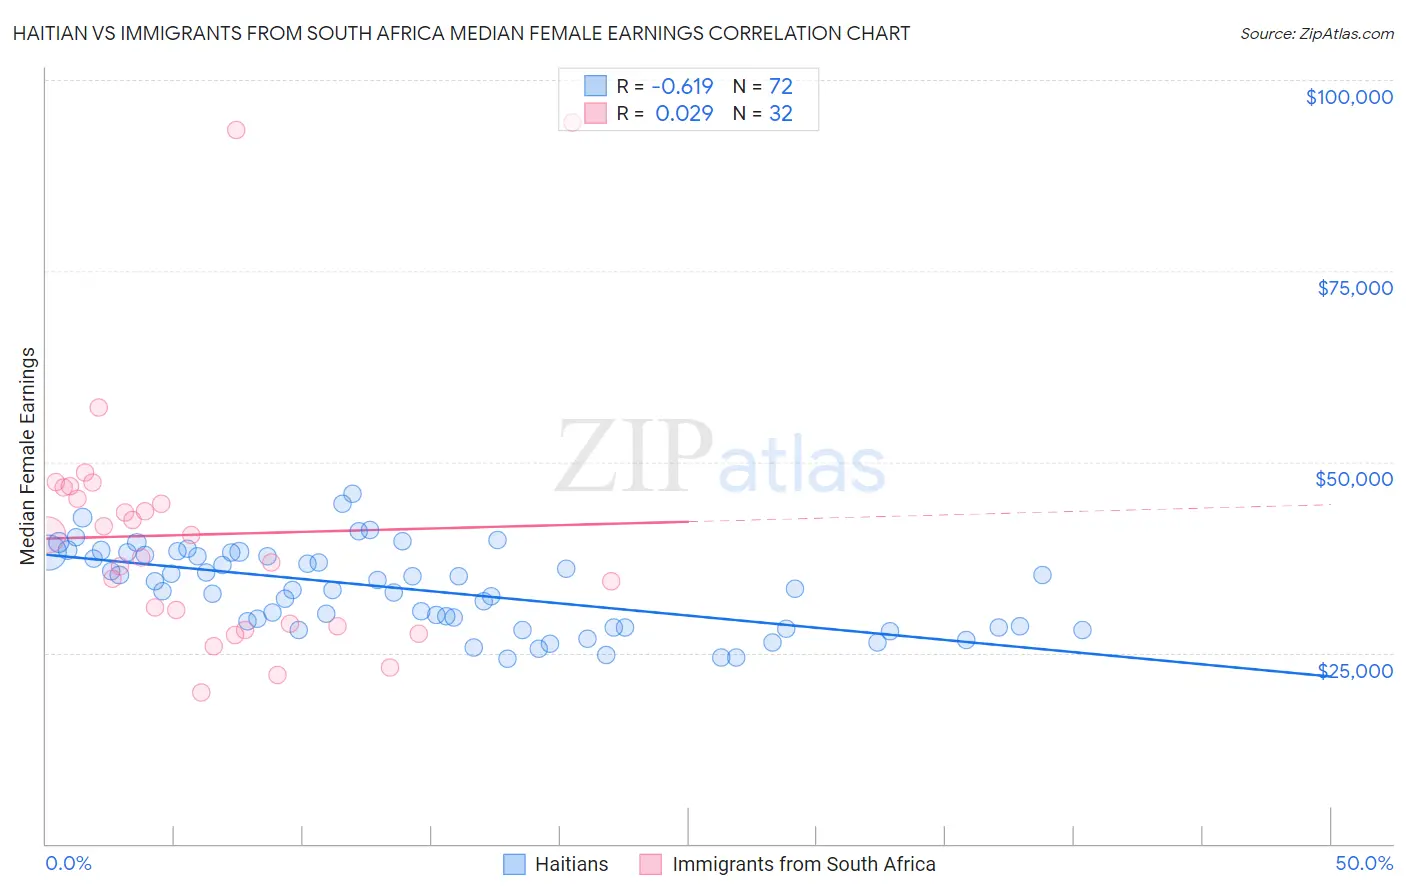 Haitian vs Immigrants from South Africa Median Female Earnings